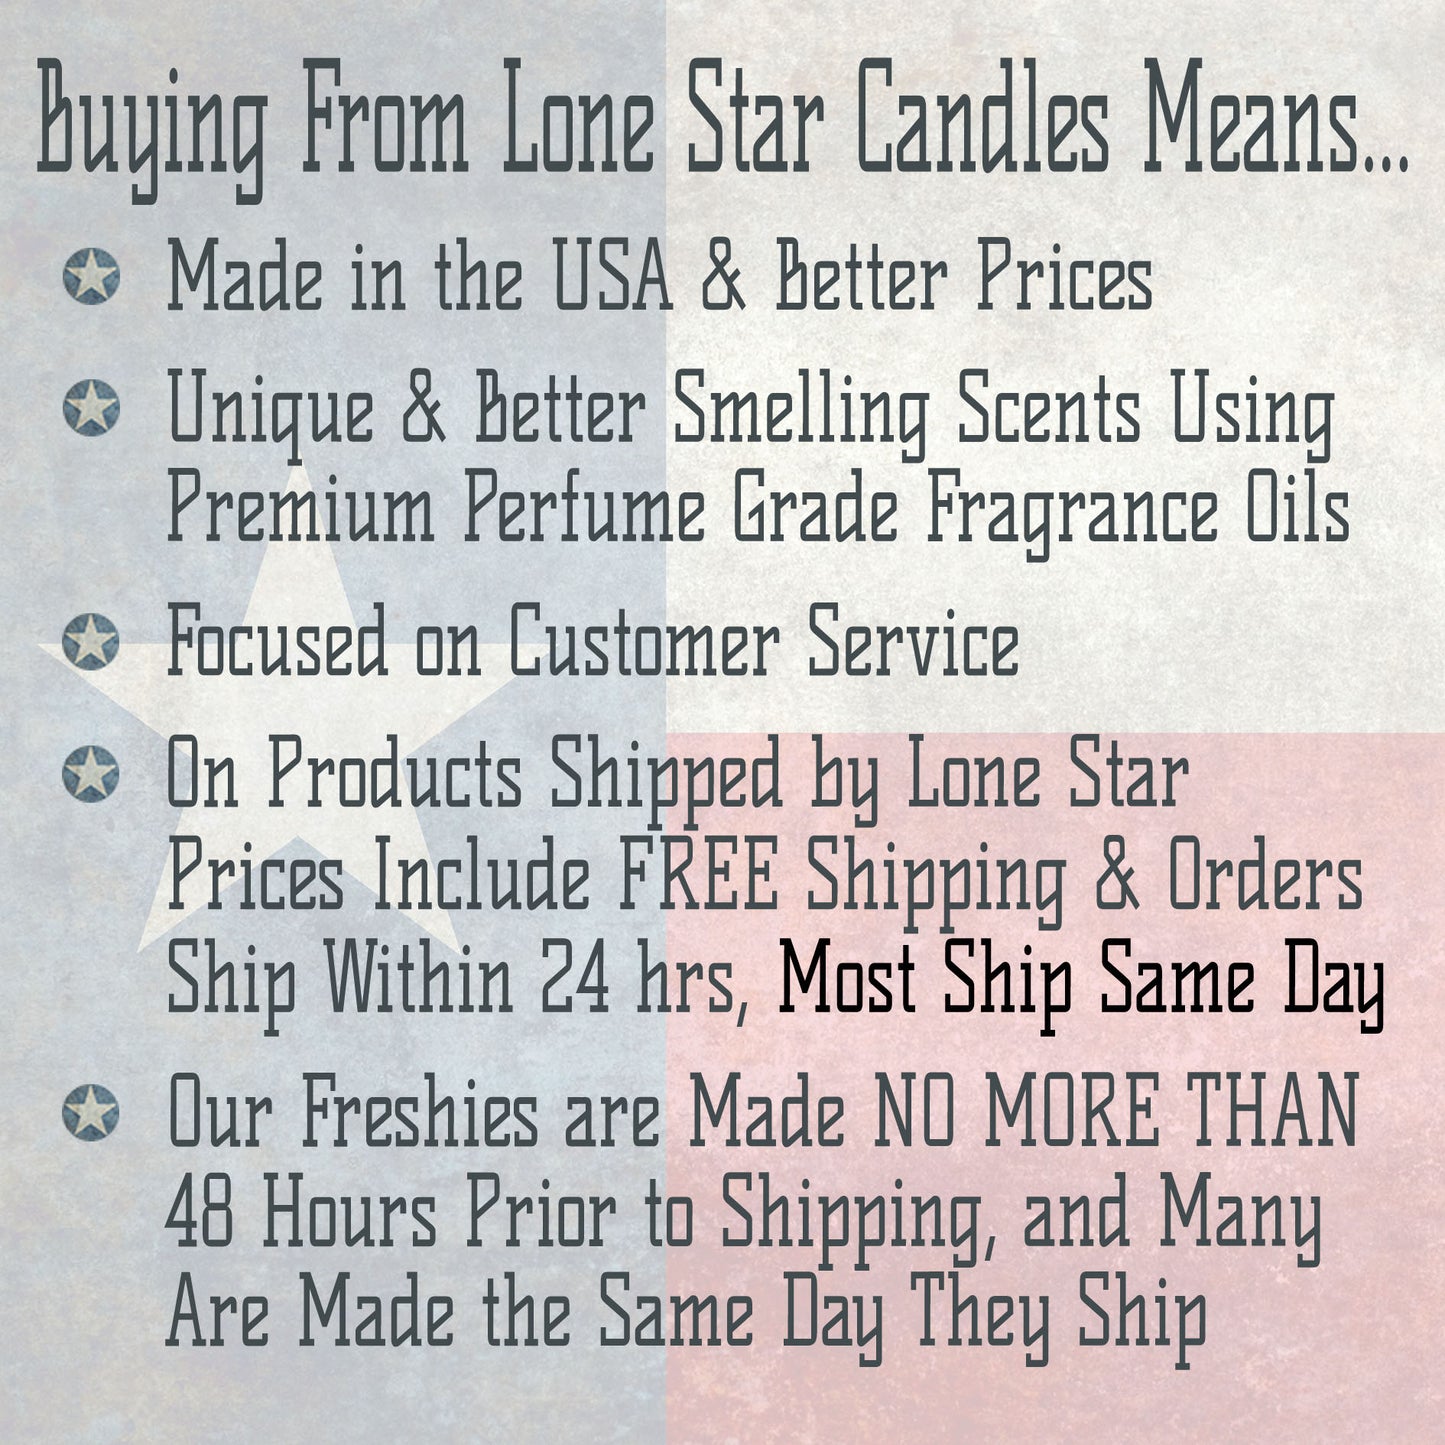 Strawberry Leather, Lone Star Candles & More's Premium Strongly Scented Freshies, Genuine Leather Aroma with Sweet & Juicy Strawberries, Car & Air Freshener, USA & Texas Made, Gnome 1-Pack